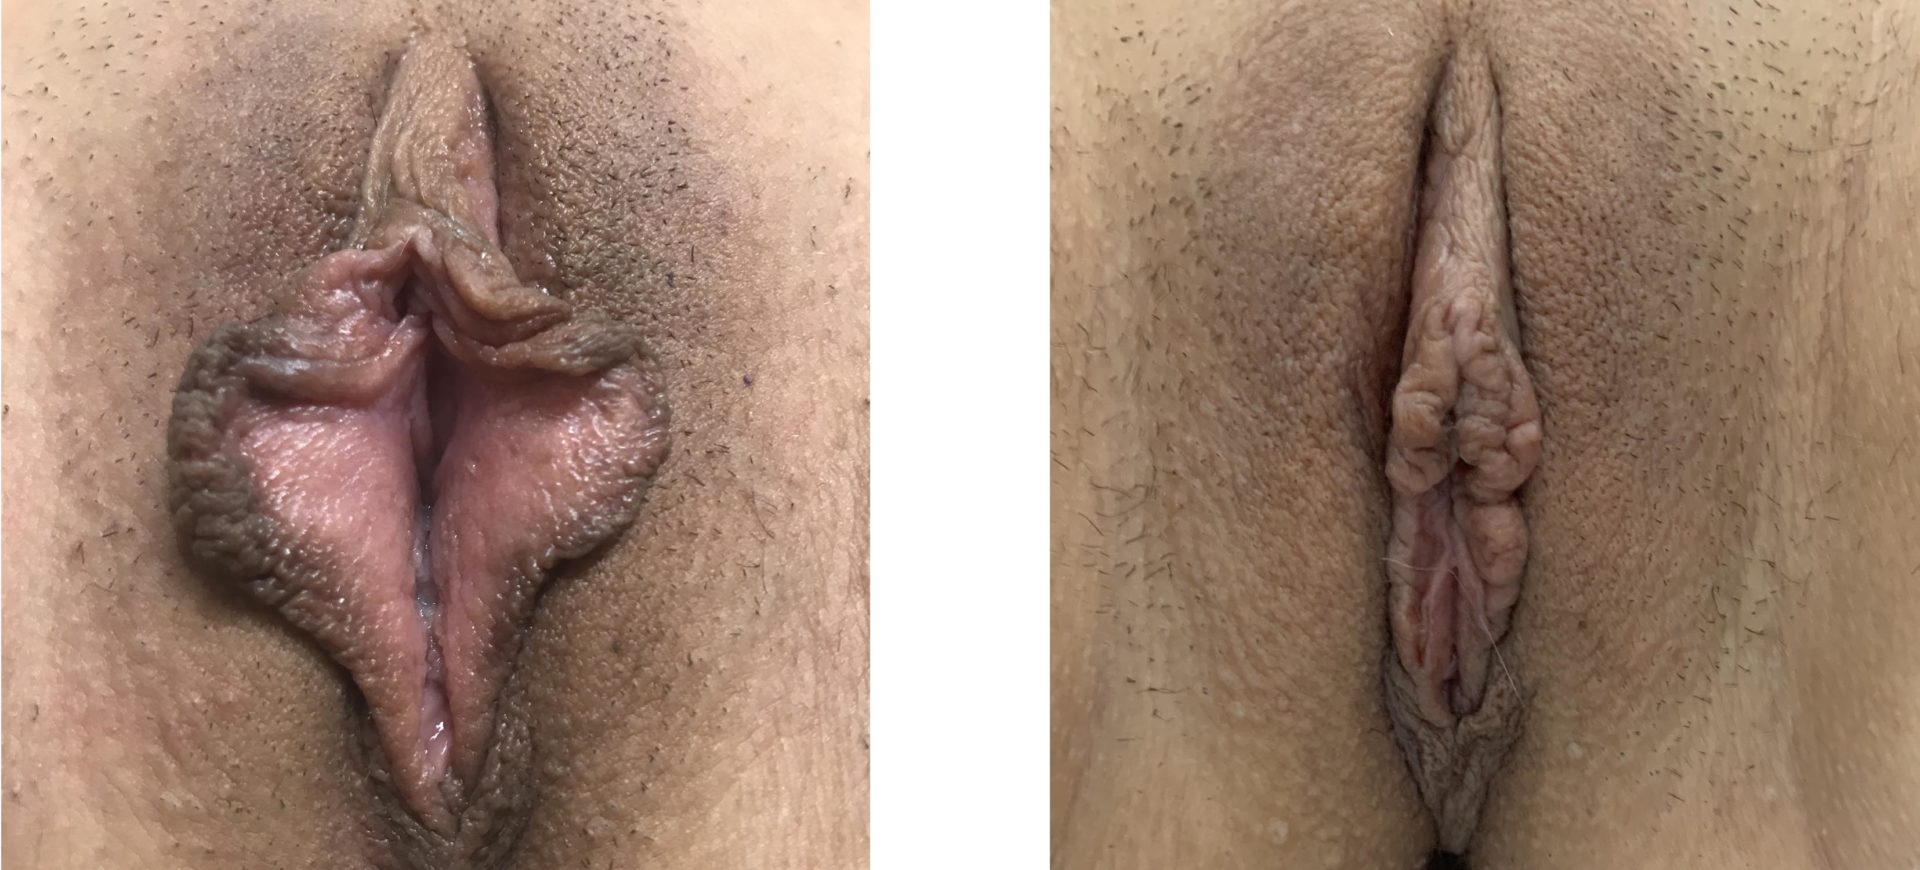 Labiaplasty Minora and Clitoral hood reduction